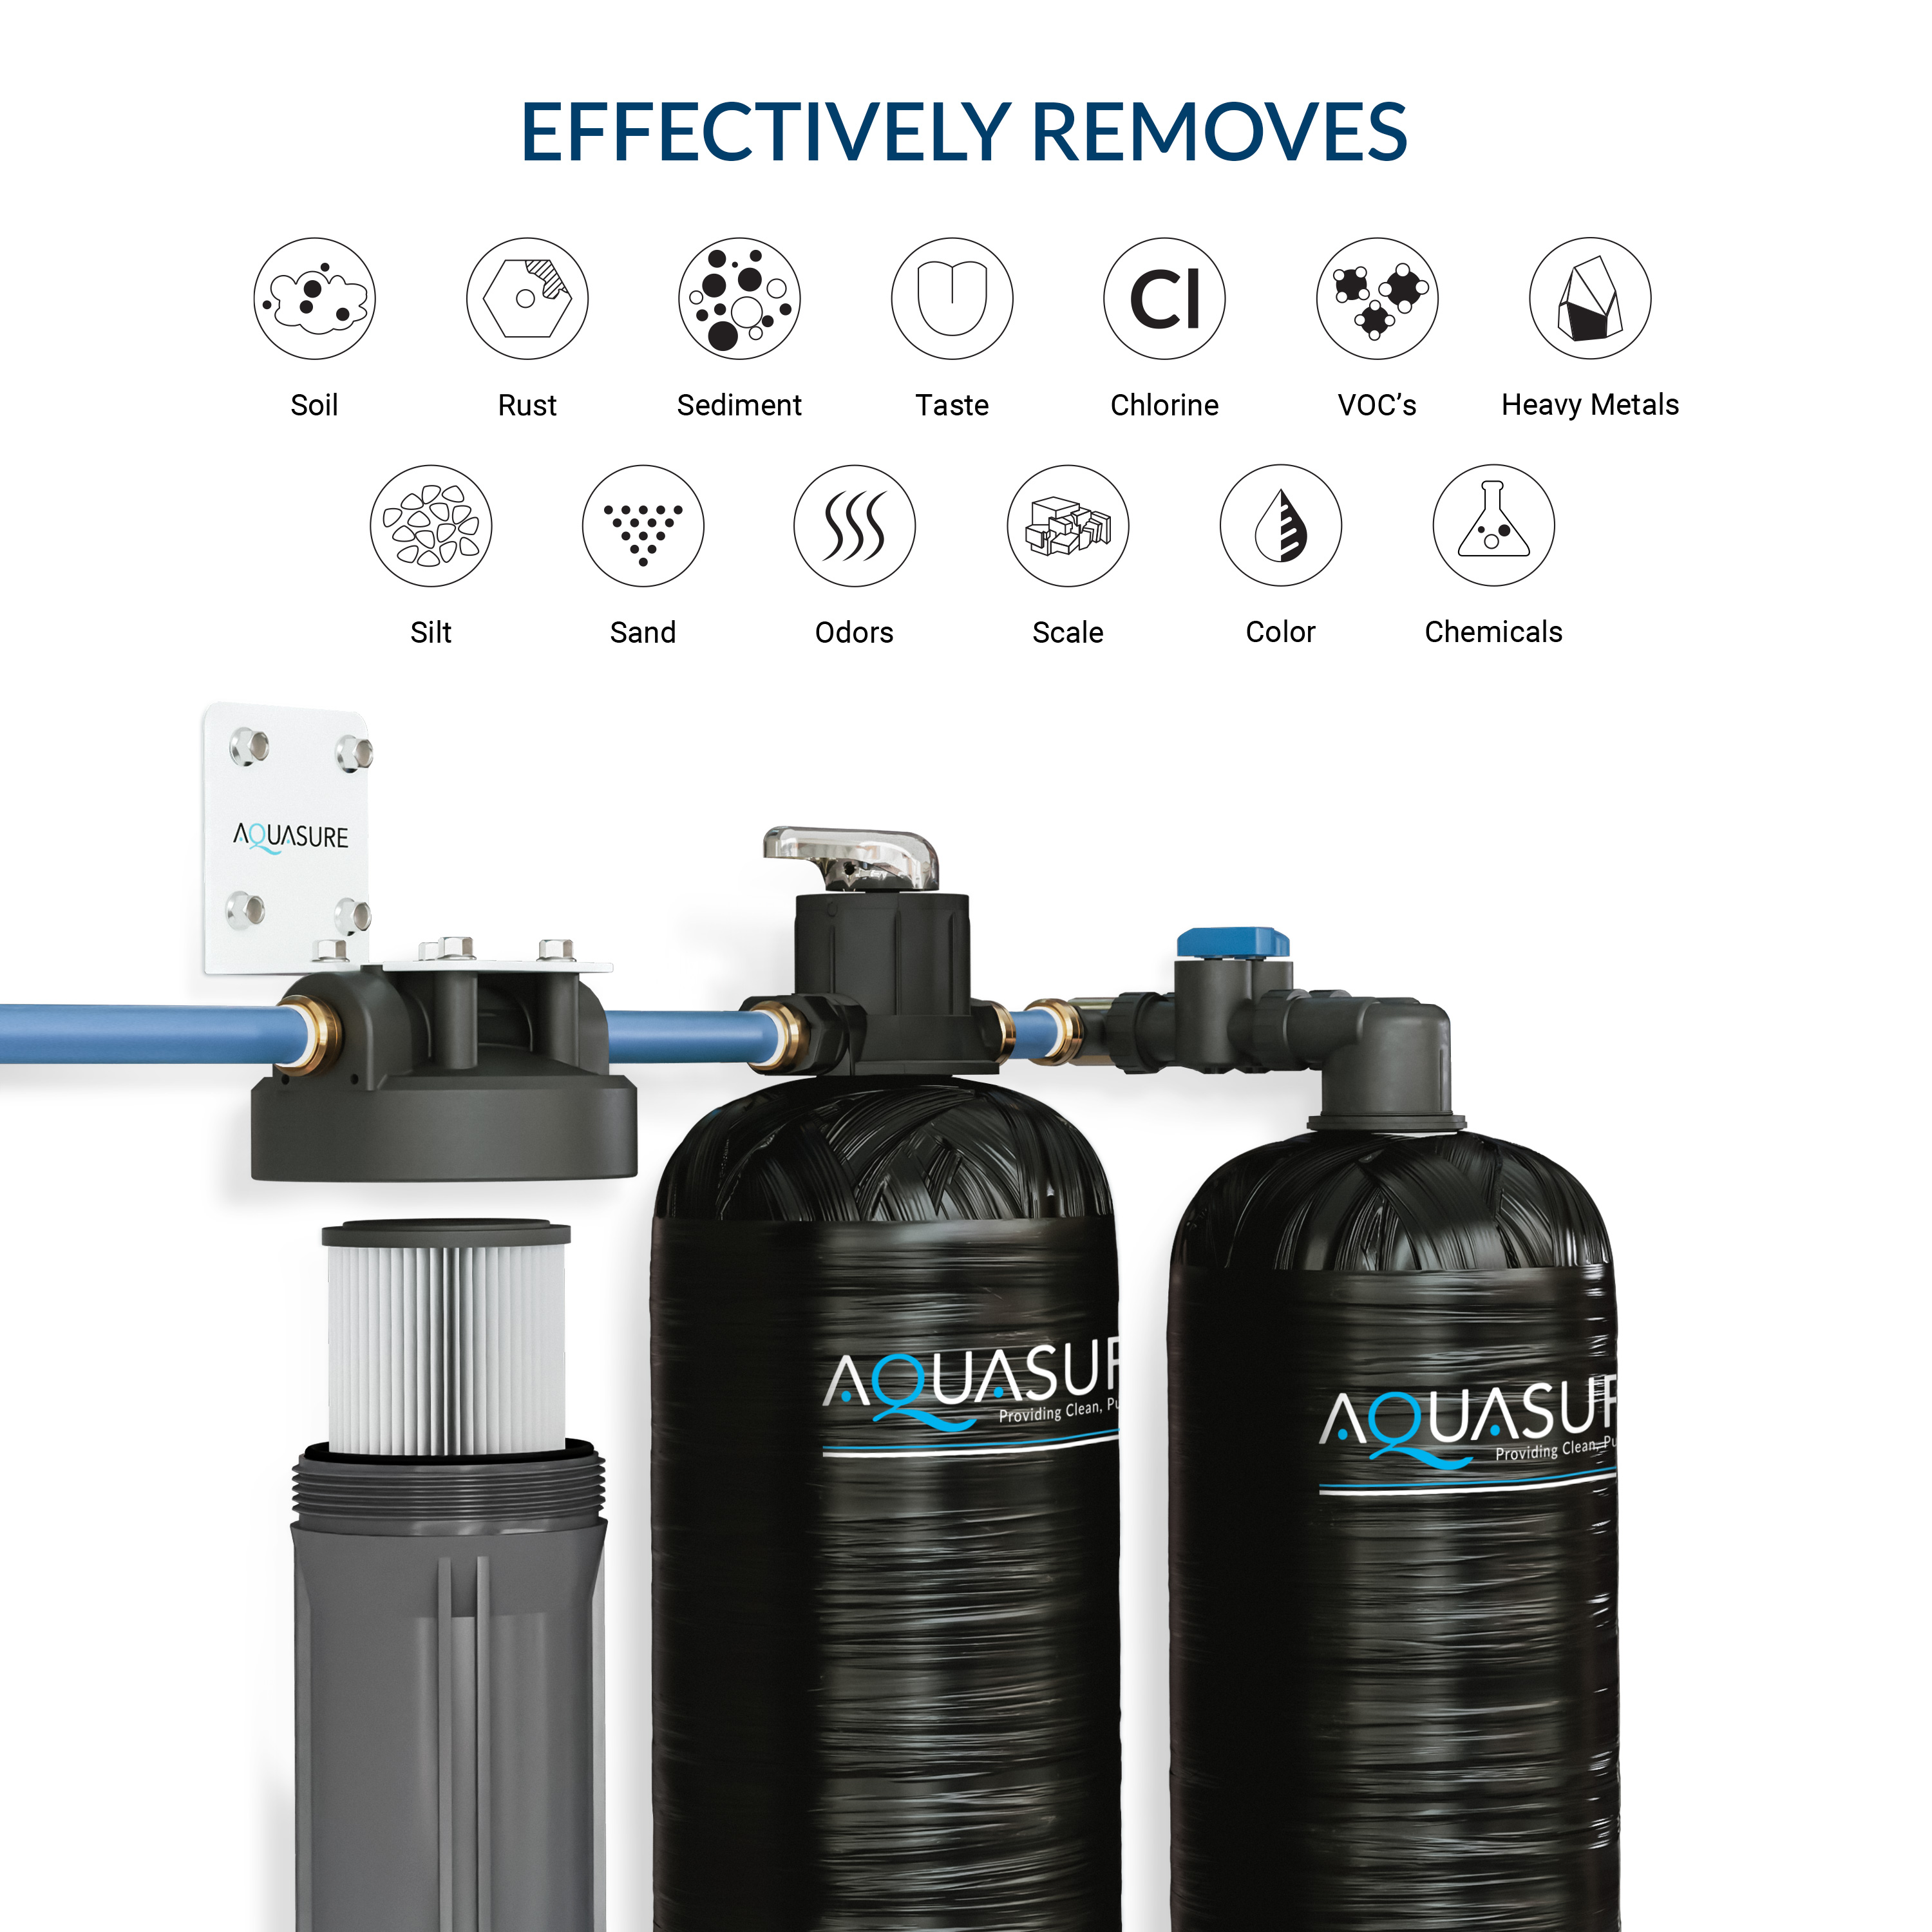 Aquasure Serene Series 15 GPM Salt-Free Conditioning Bundle with Whole House Water Treatment System & Pleated Sediment Pre-Filter